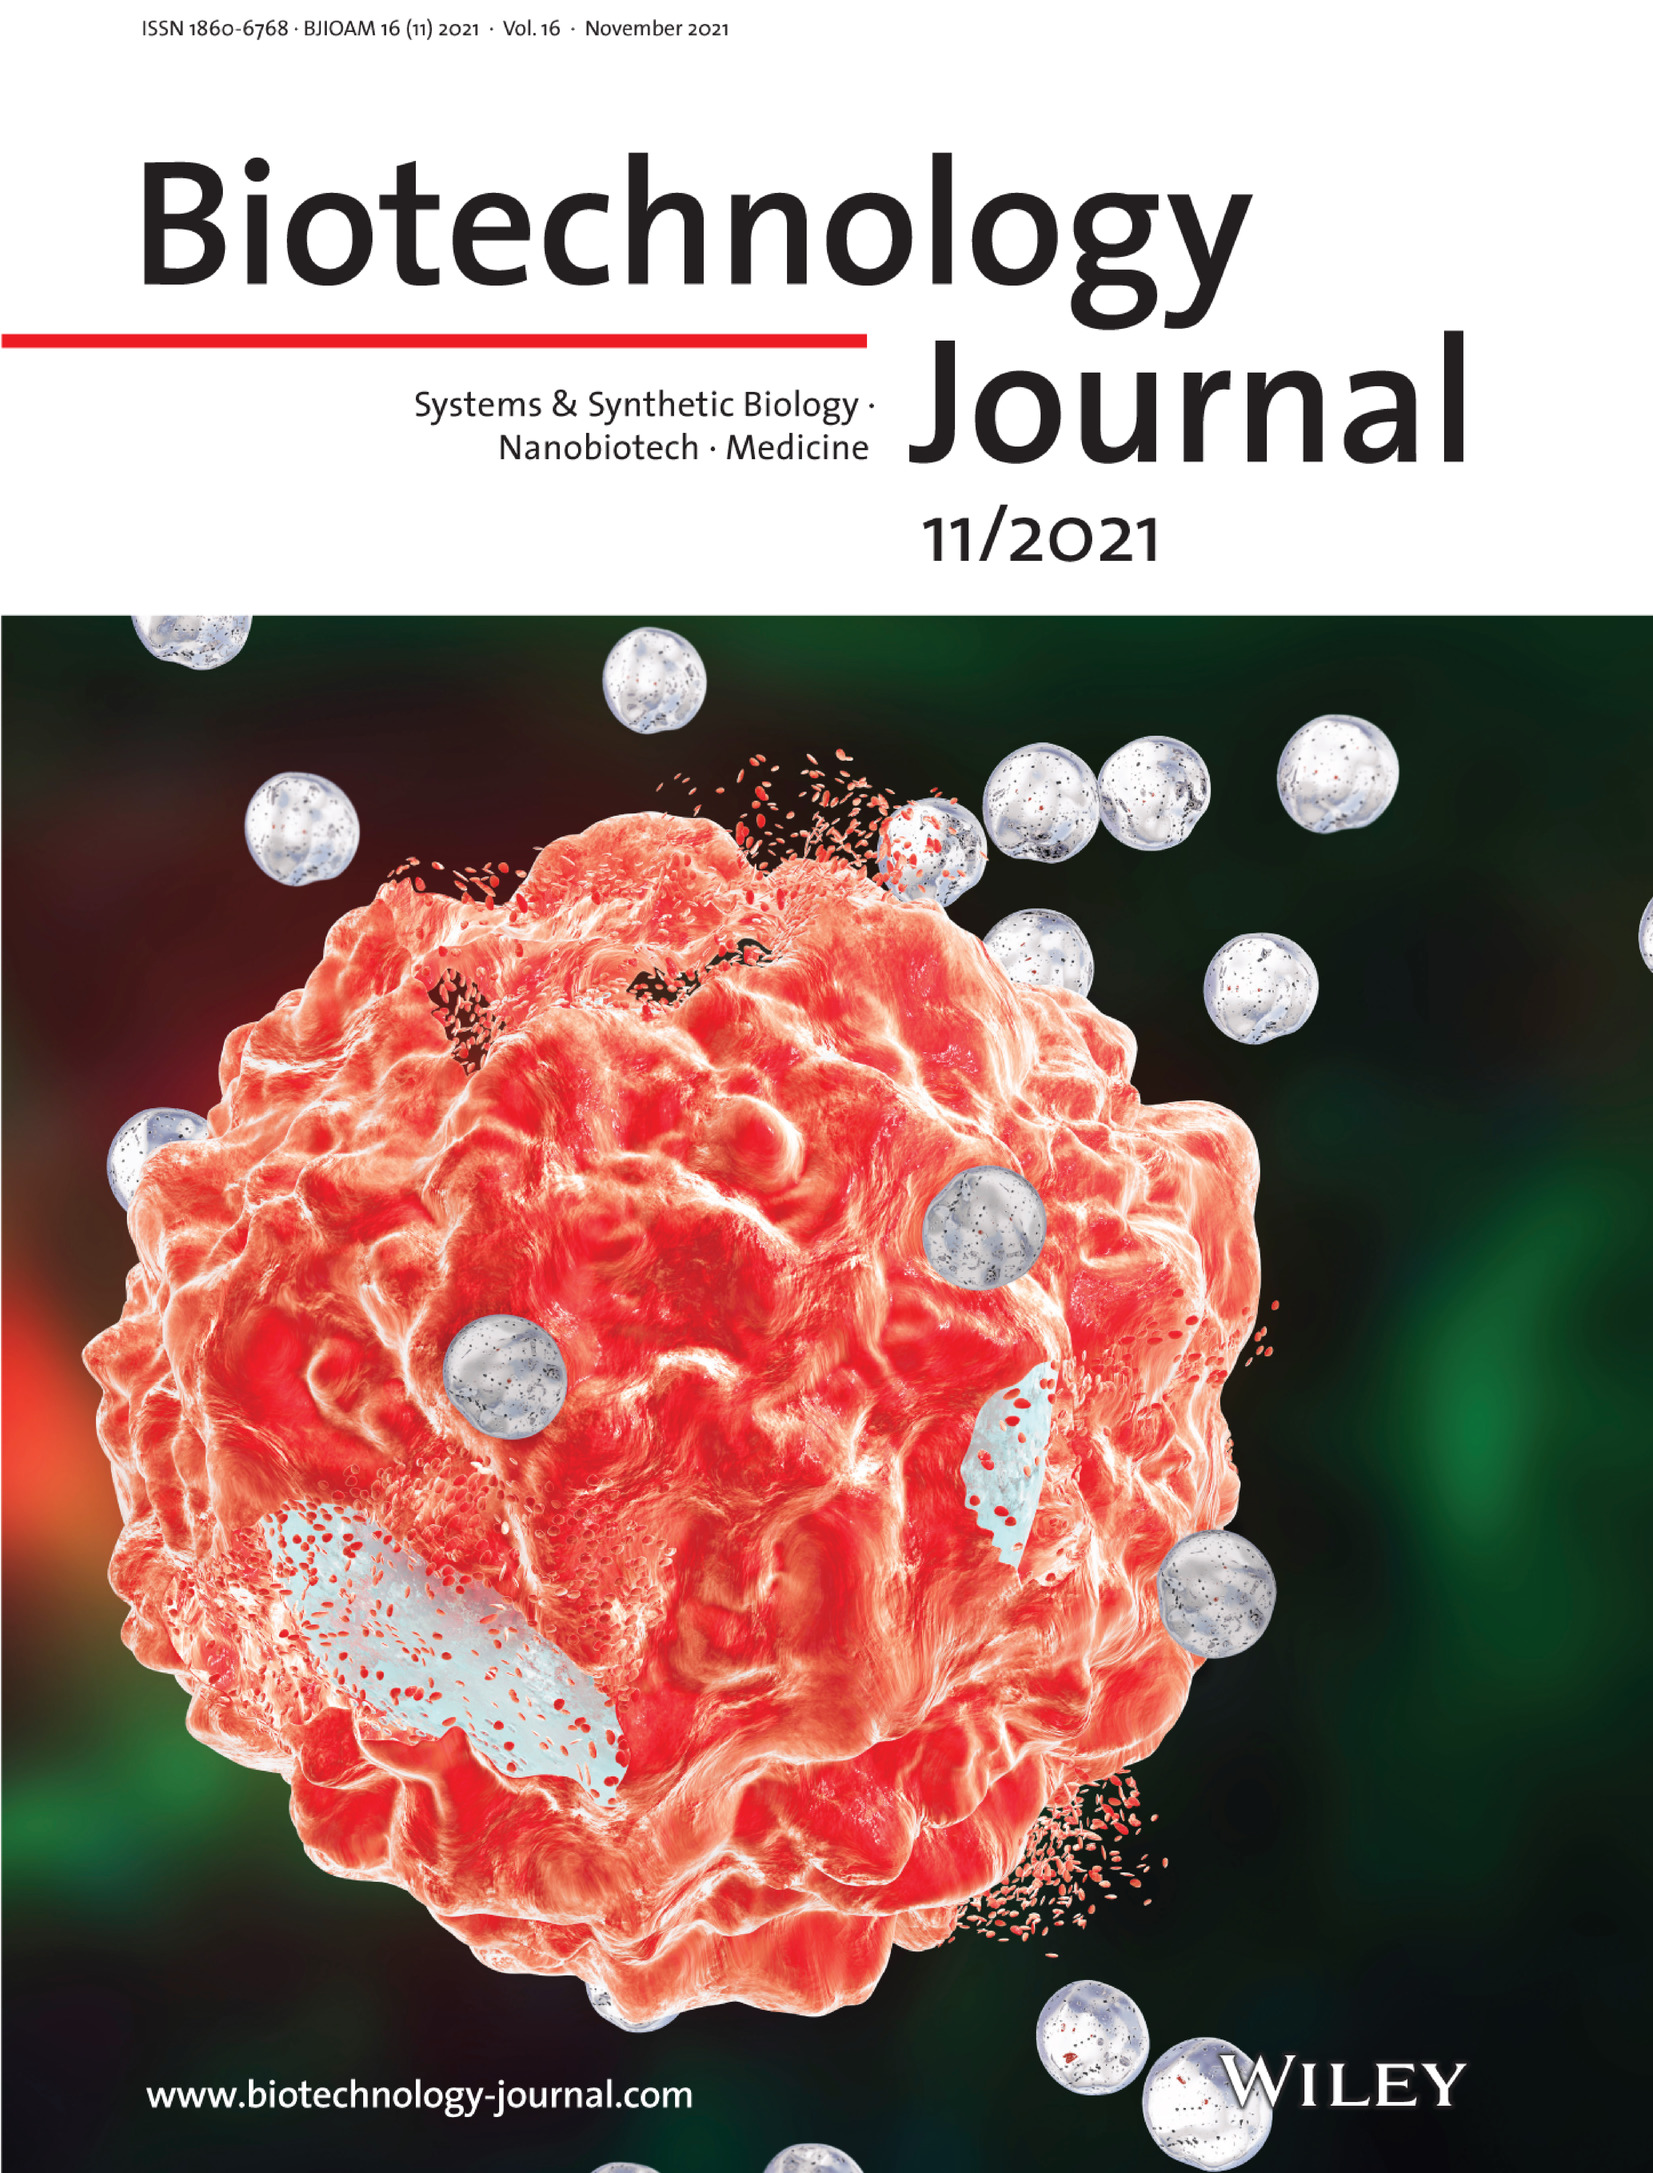 Outside Front Cover: (Biotechnology Journal 11/2021)